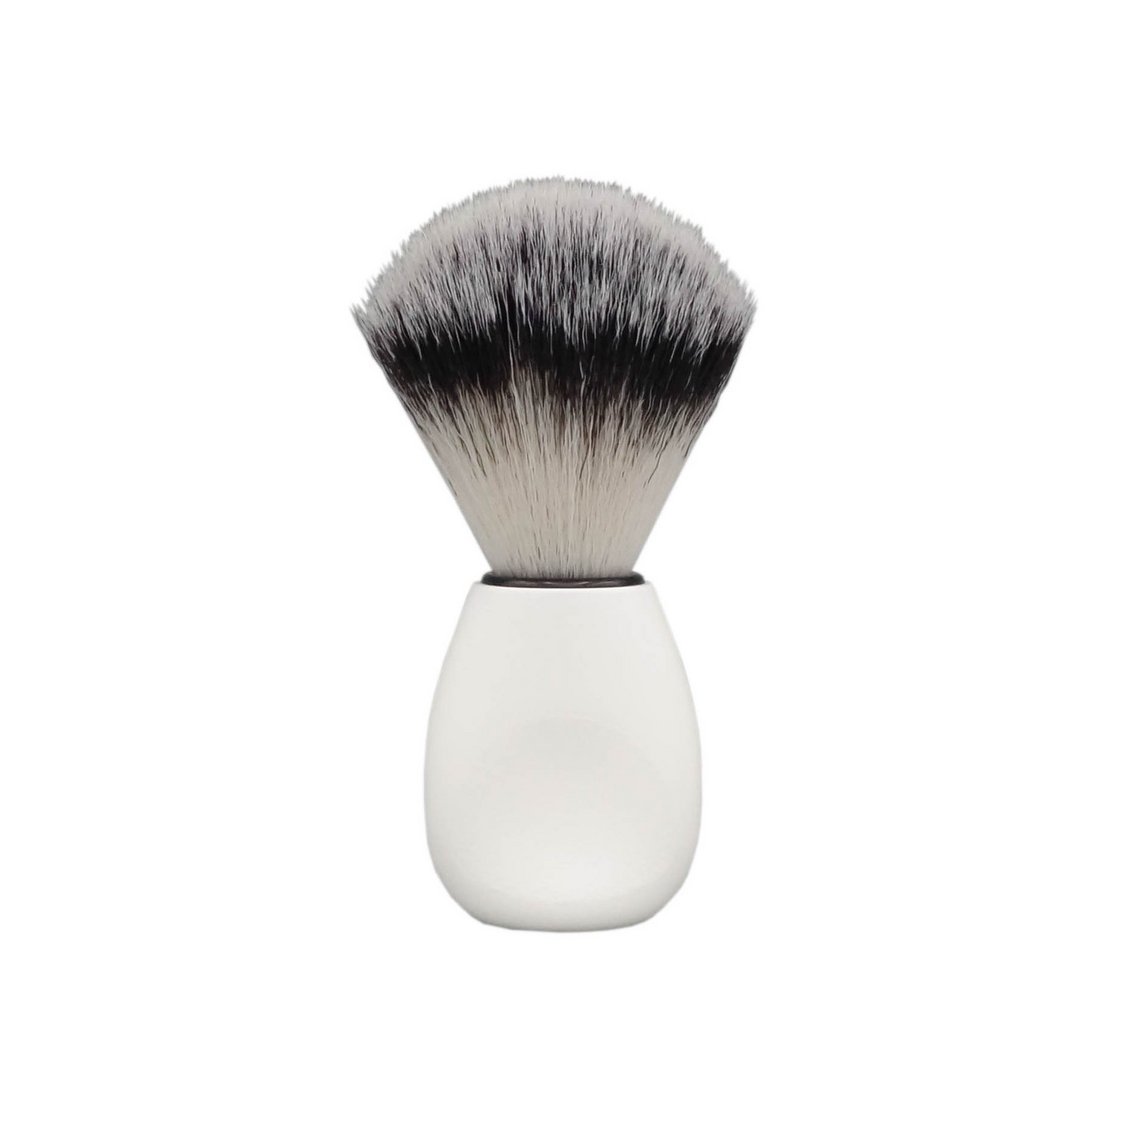 Shaving brush sythetic 3-band white handle with grip zone